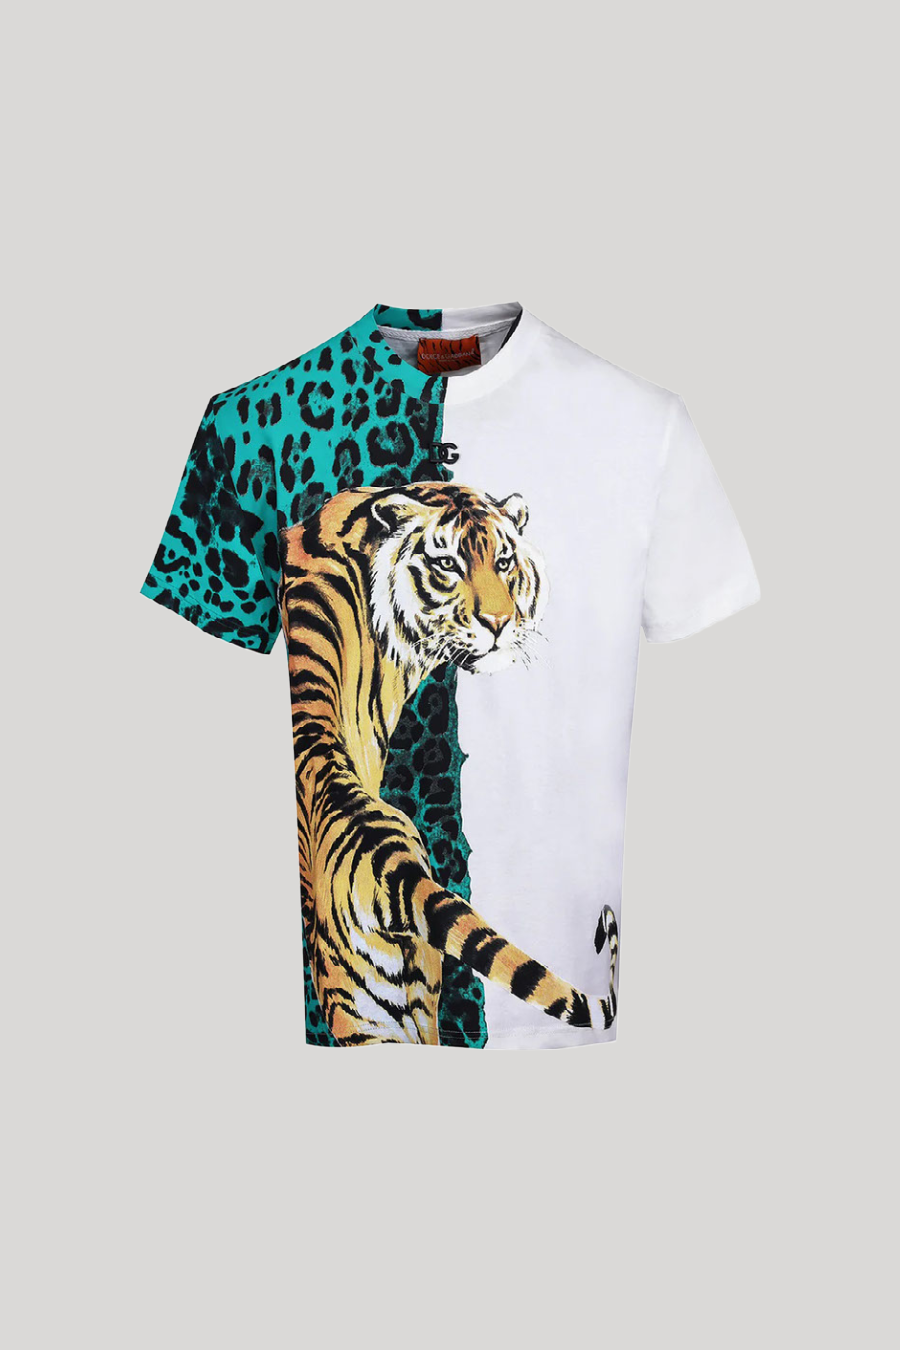 DOLCE & GABBANA JERSEY WHITE T-SHIRT WITH TIGER PRINT